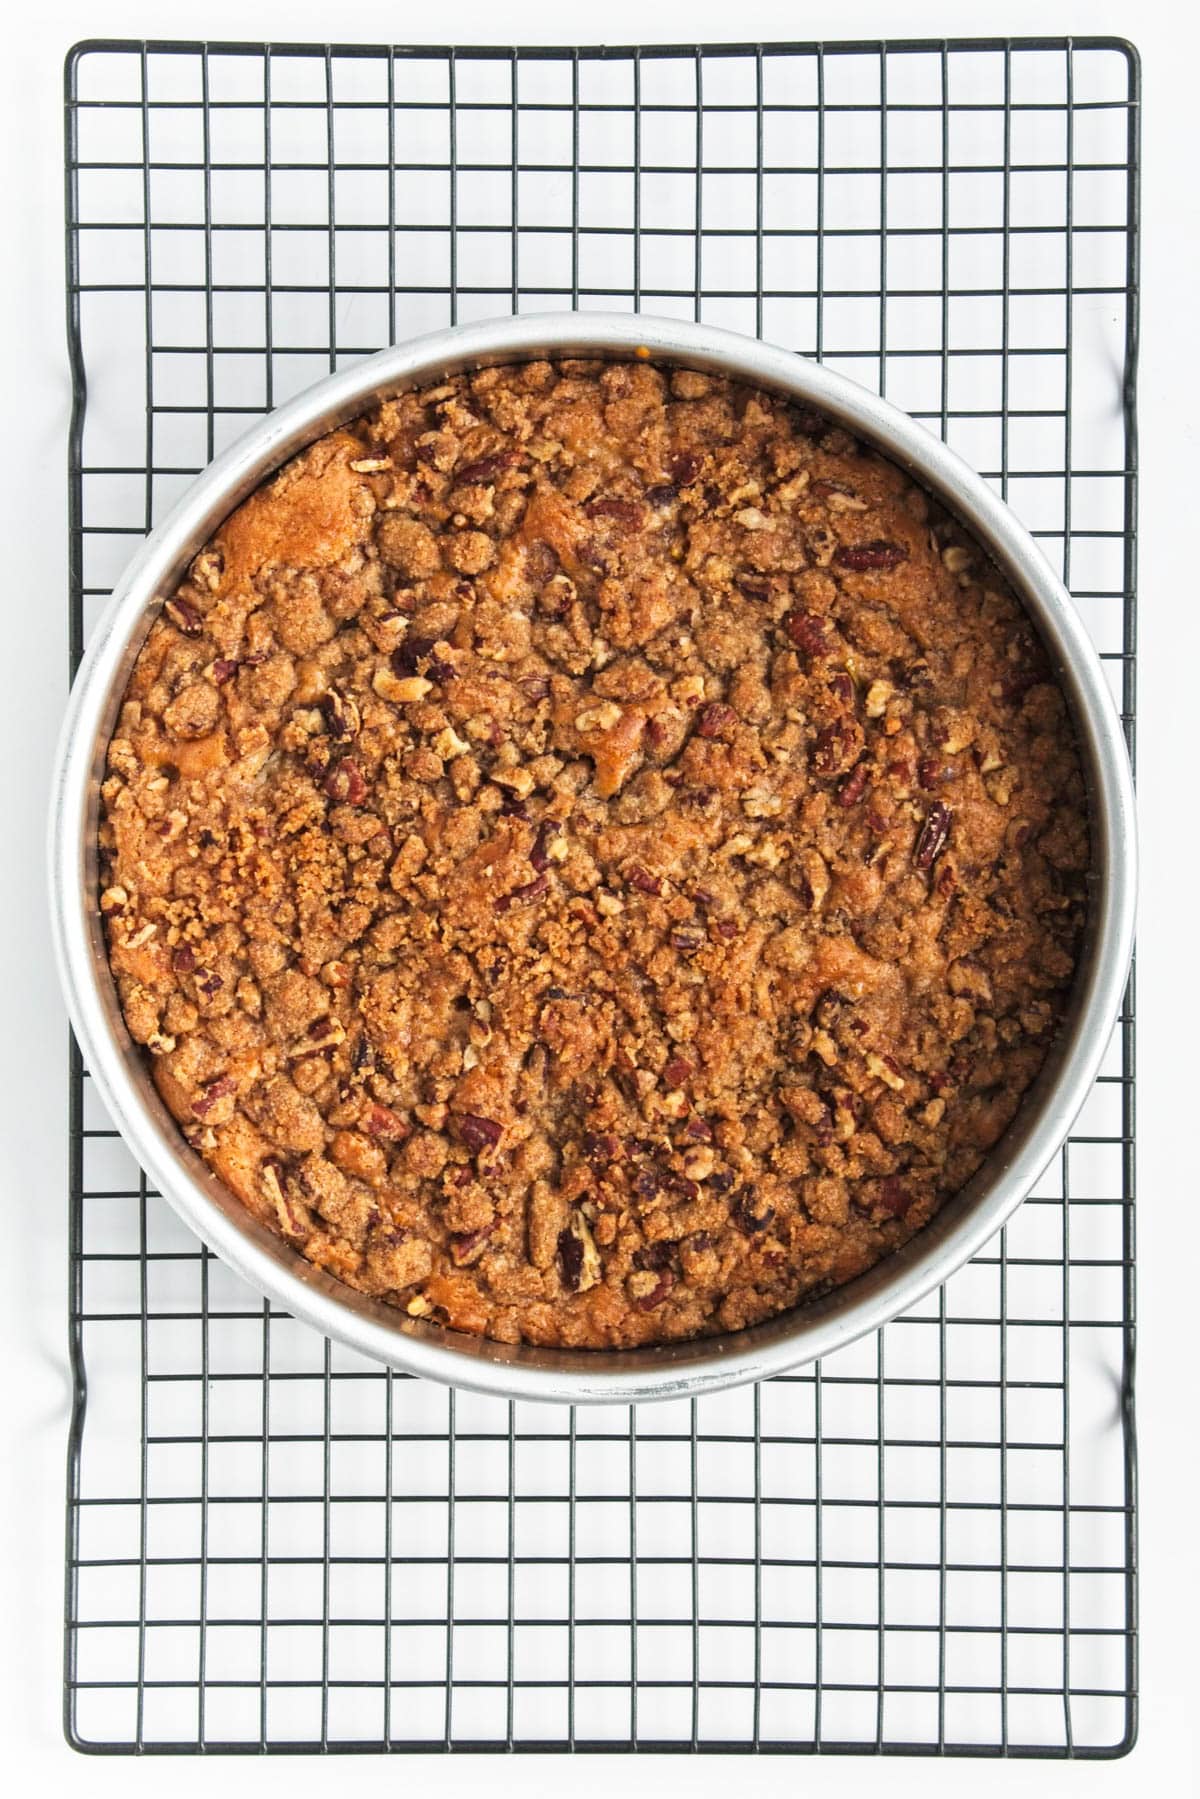 Coffee cake with cinnamon streusel in pan on wire rack.